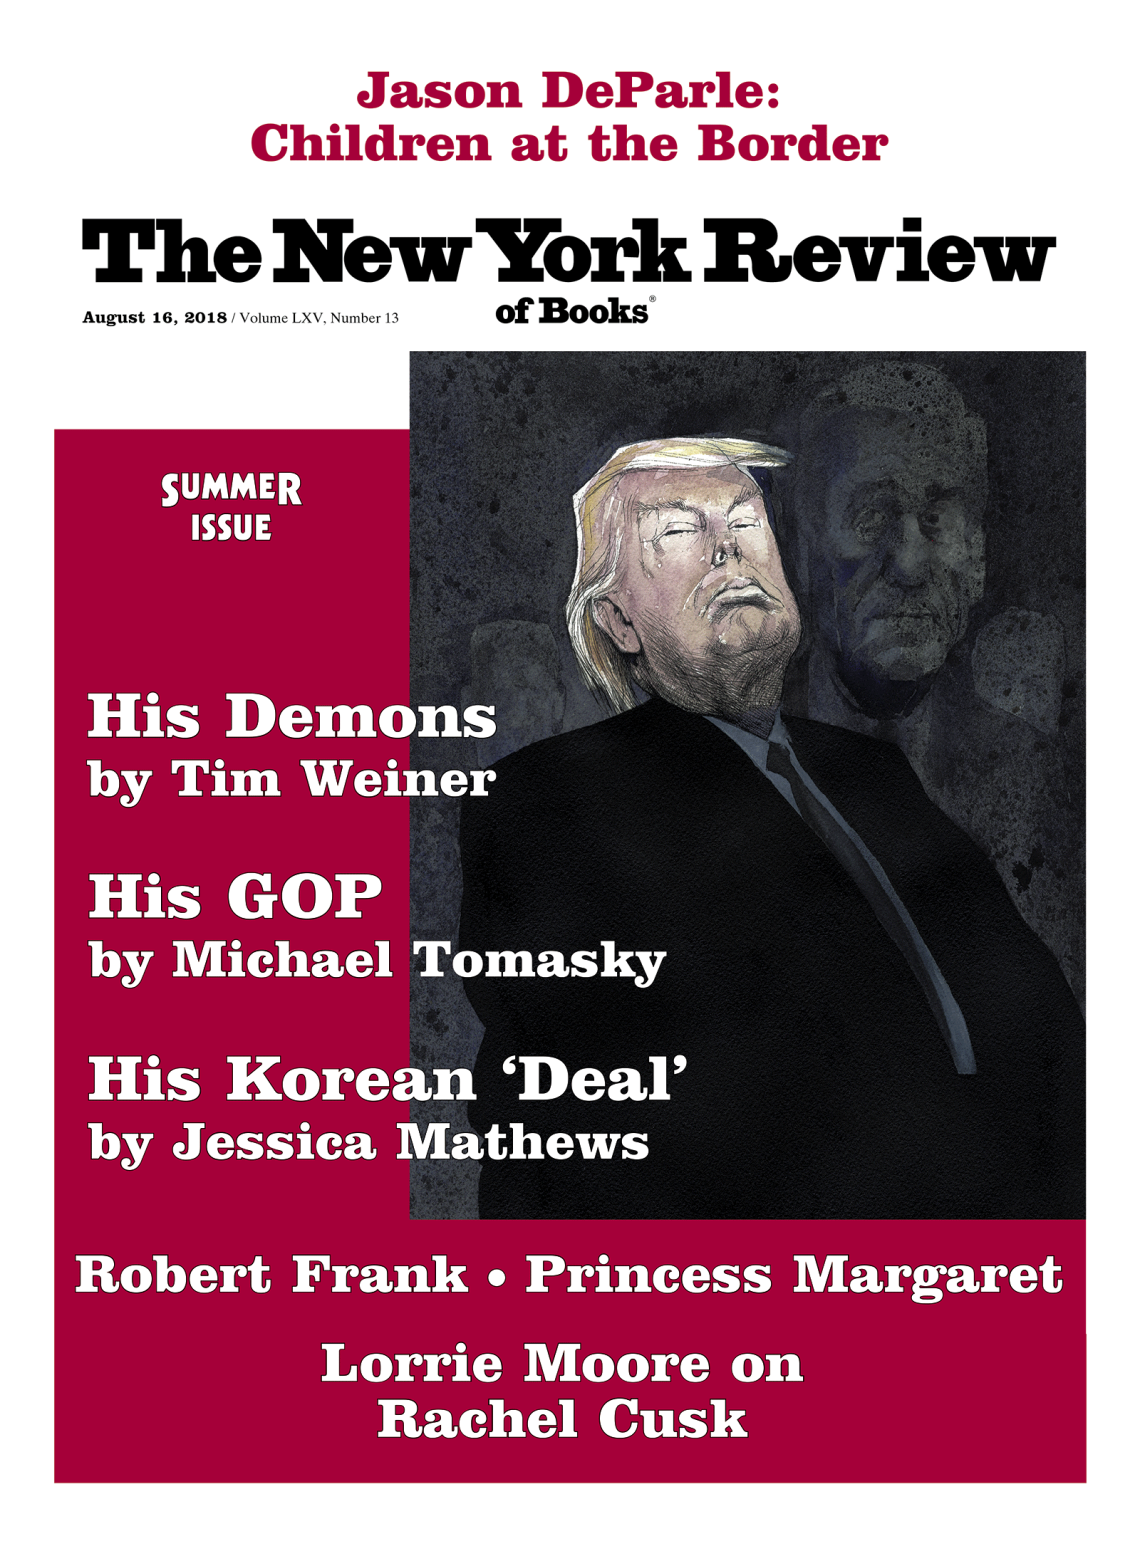 Image of the August 16, 2018 issue cover.